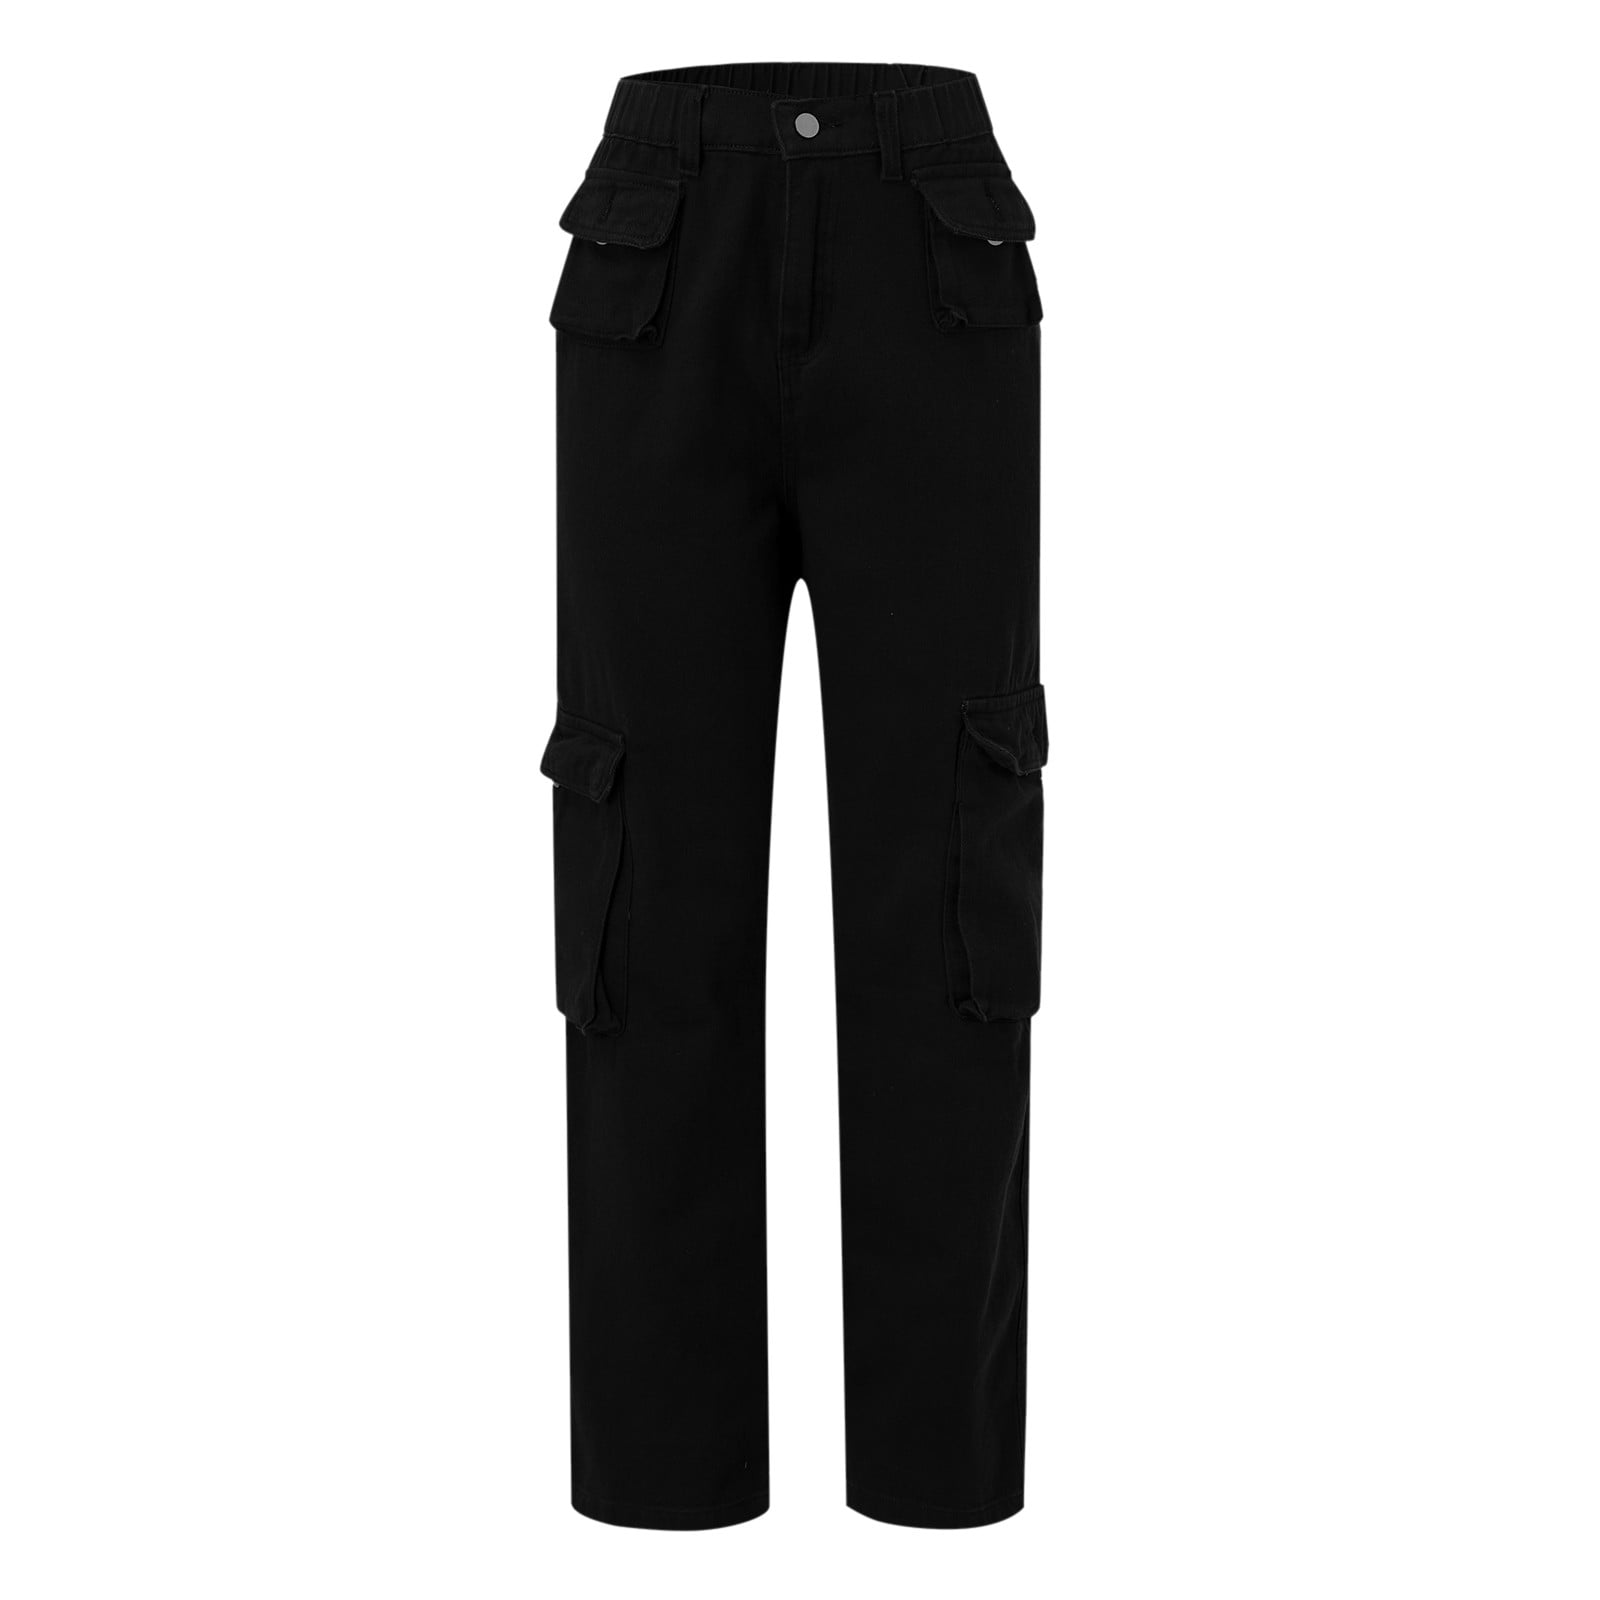 Aayomet Joggers For Women Women's Joggers Pants Lightweight Quick Dry  Workout Track Pants for Women with Zipper Pockets,Black M 